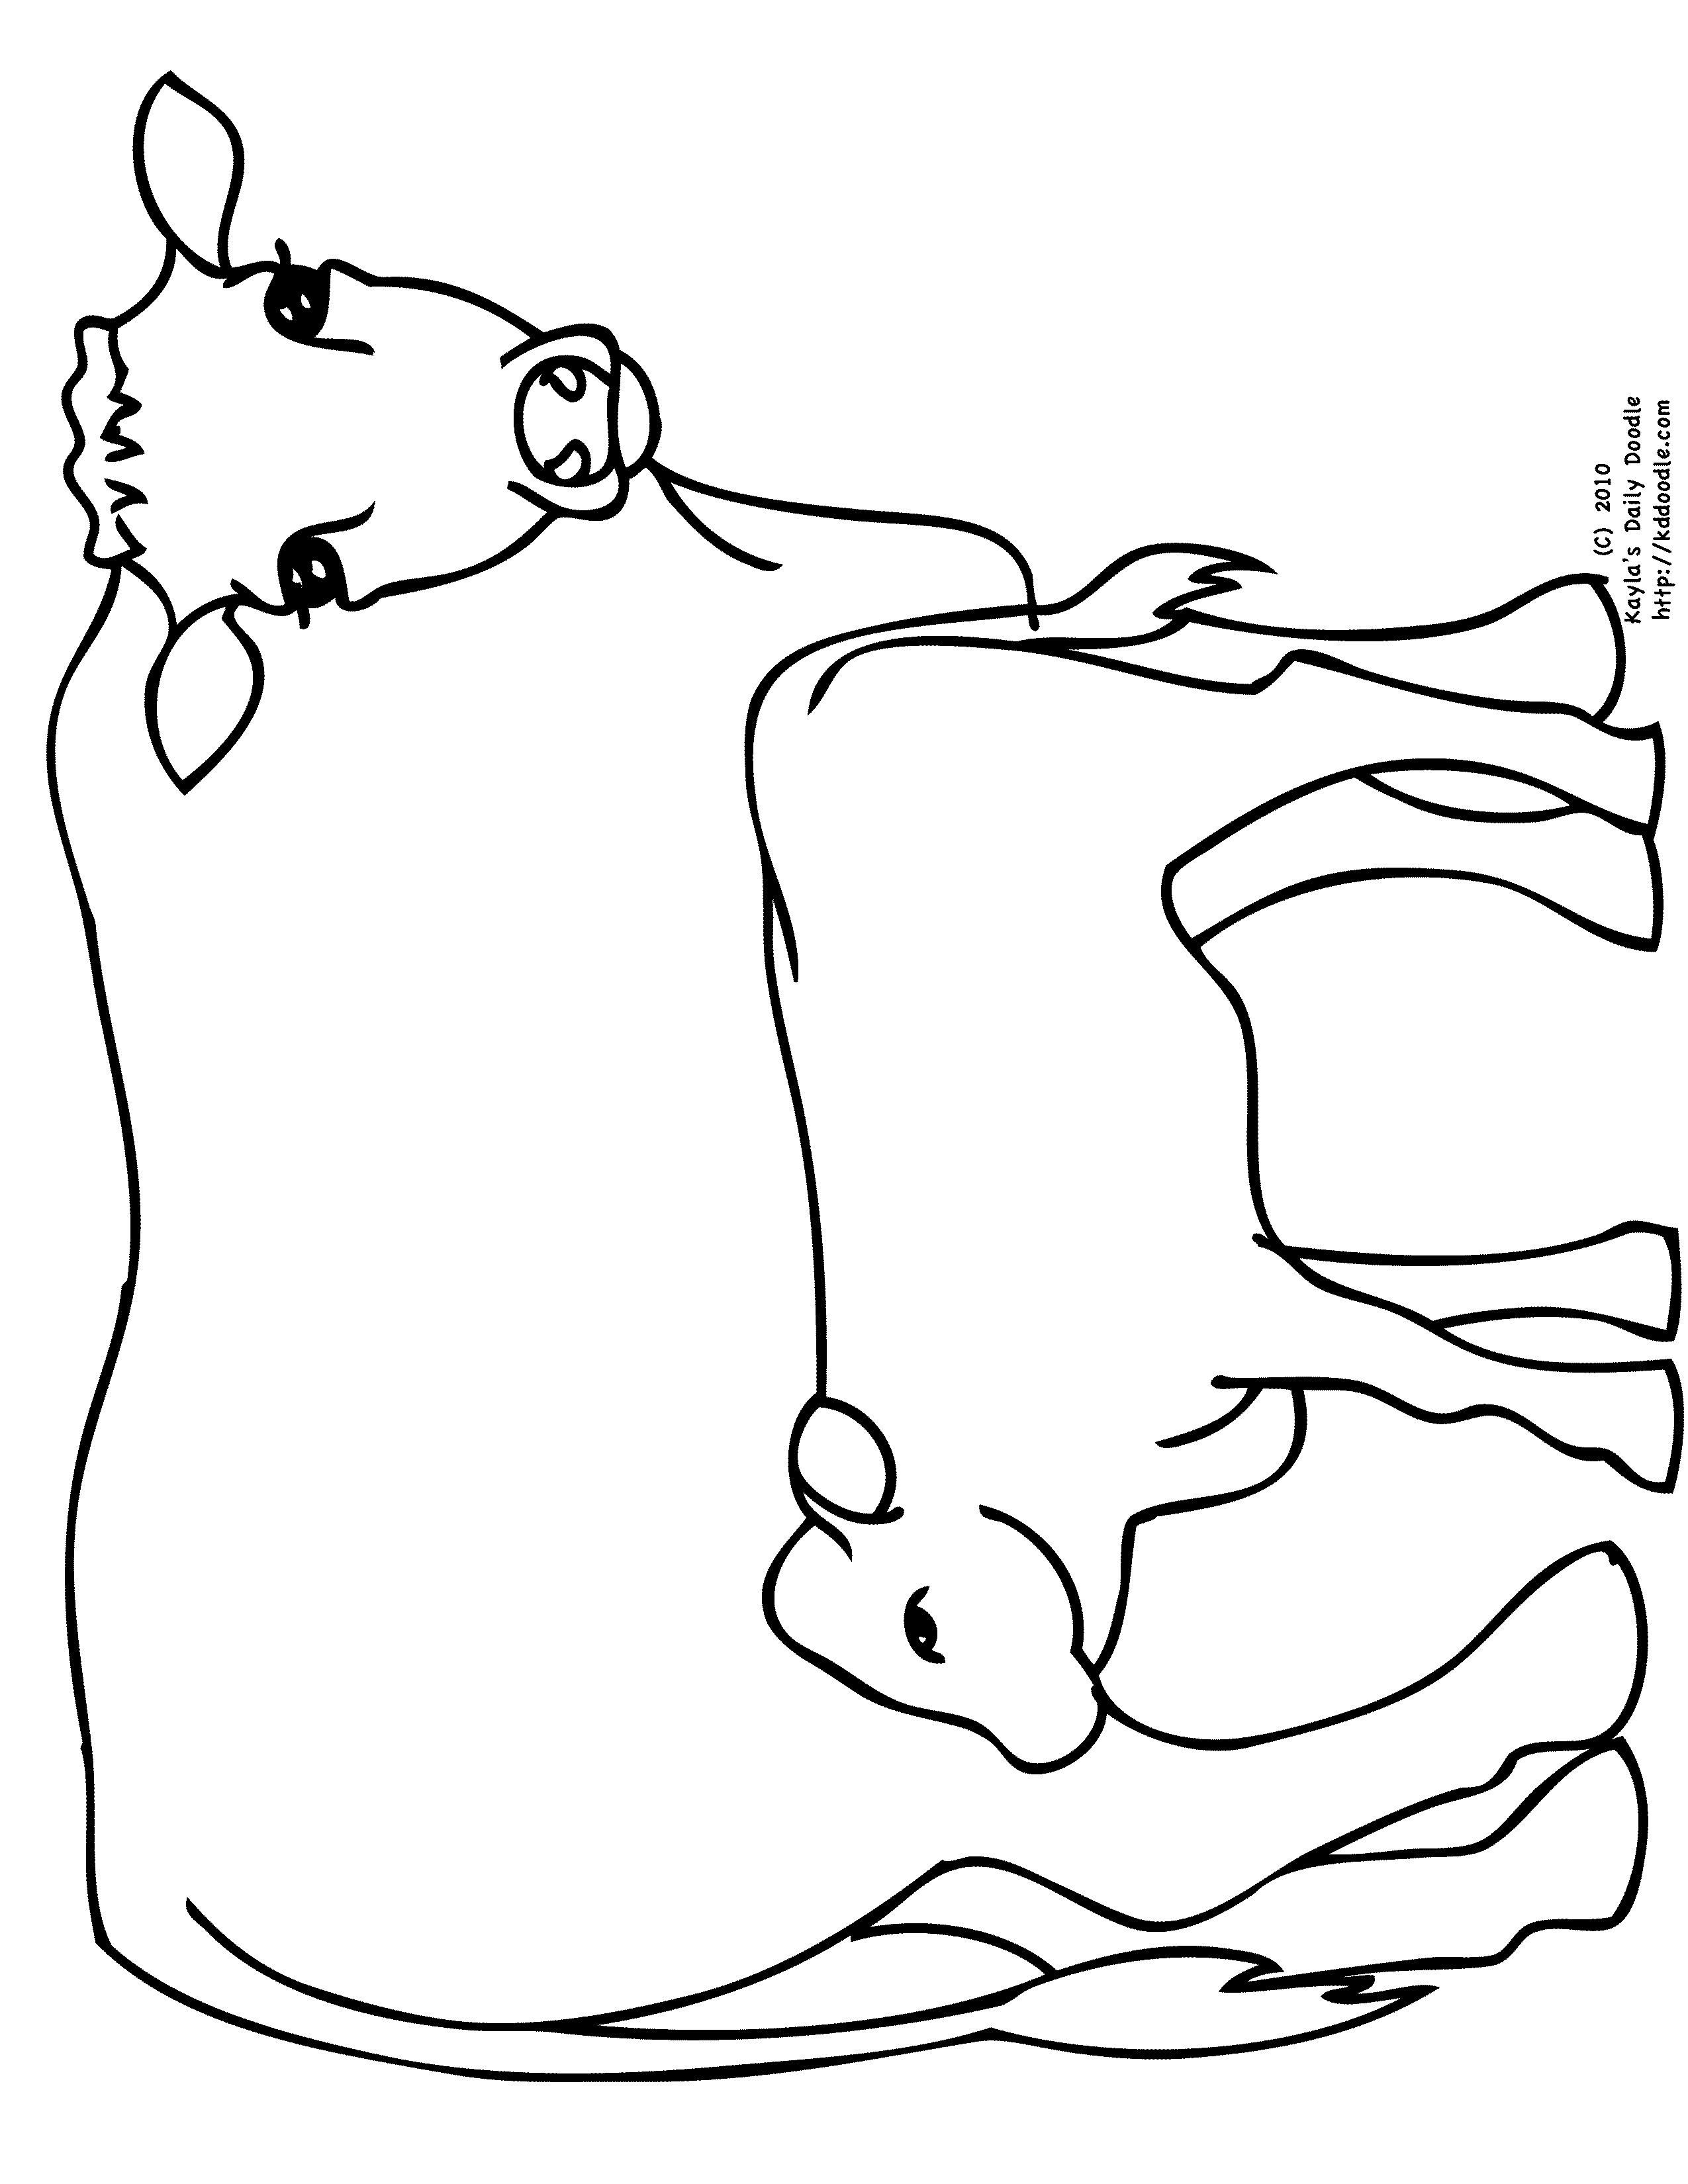 Angus Cow Coloring Pages